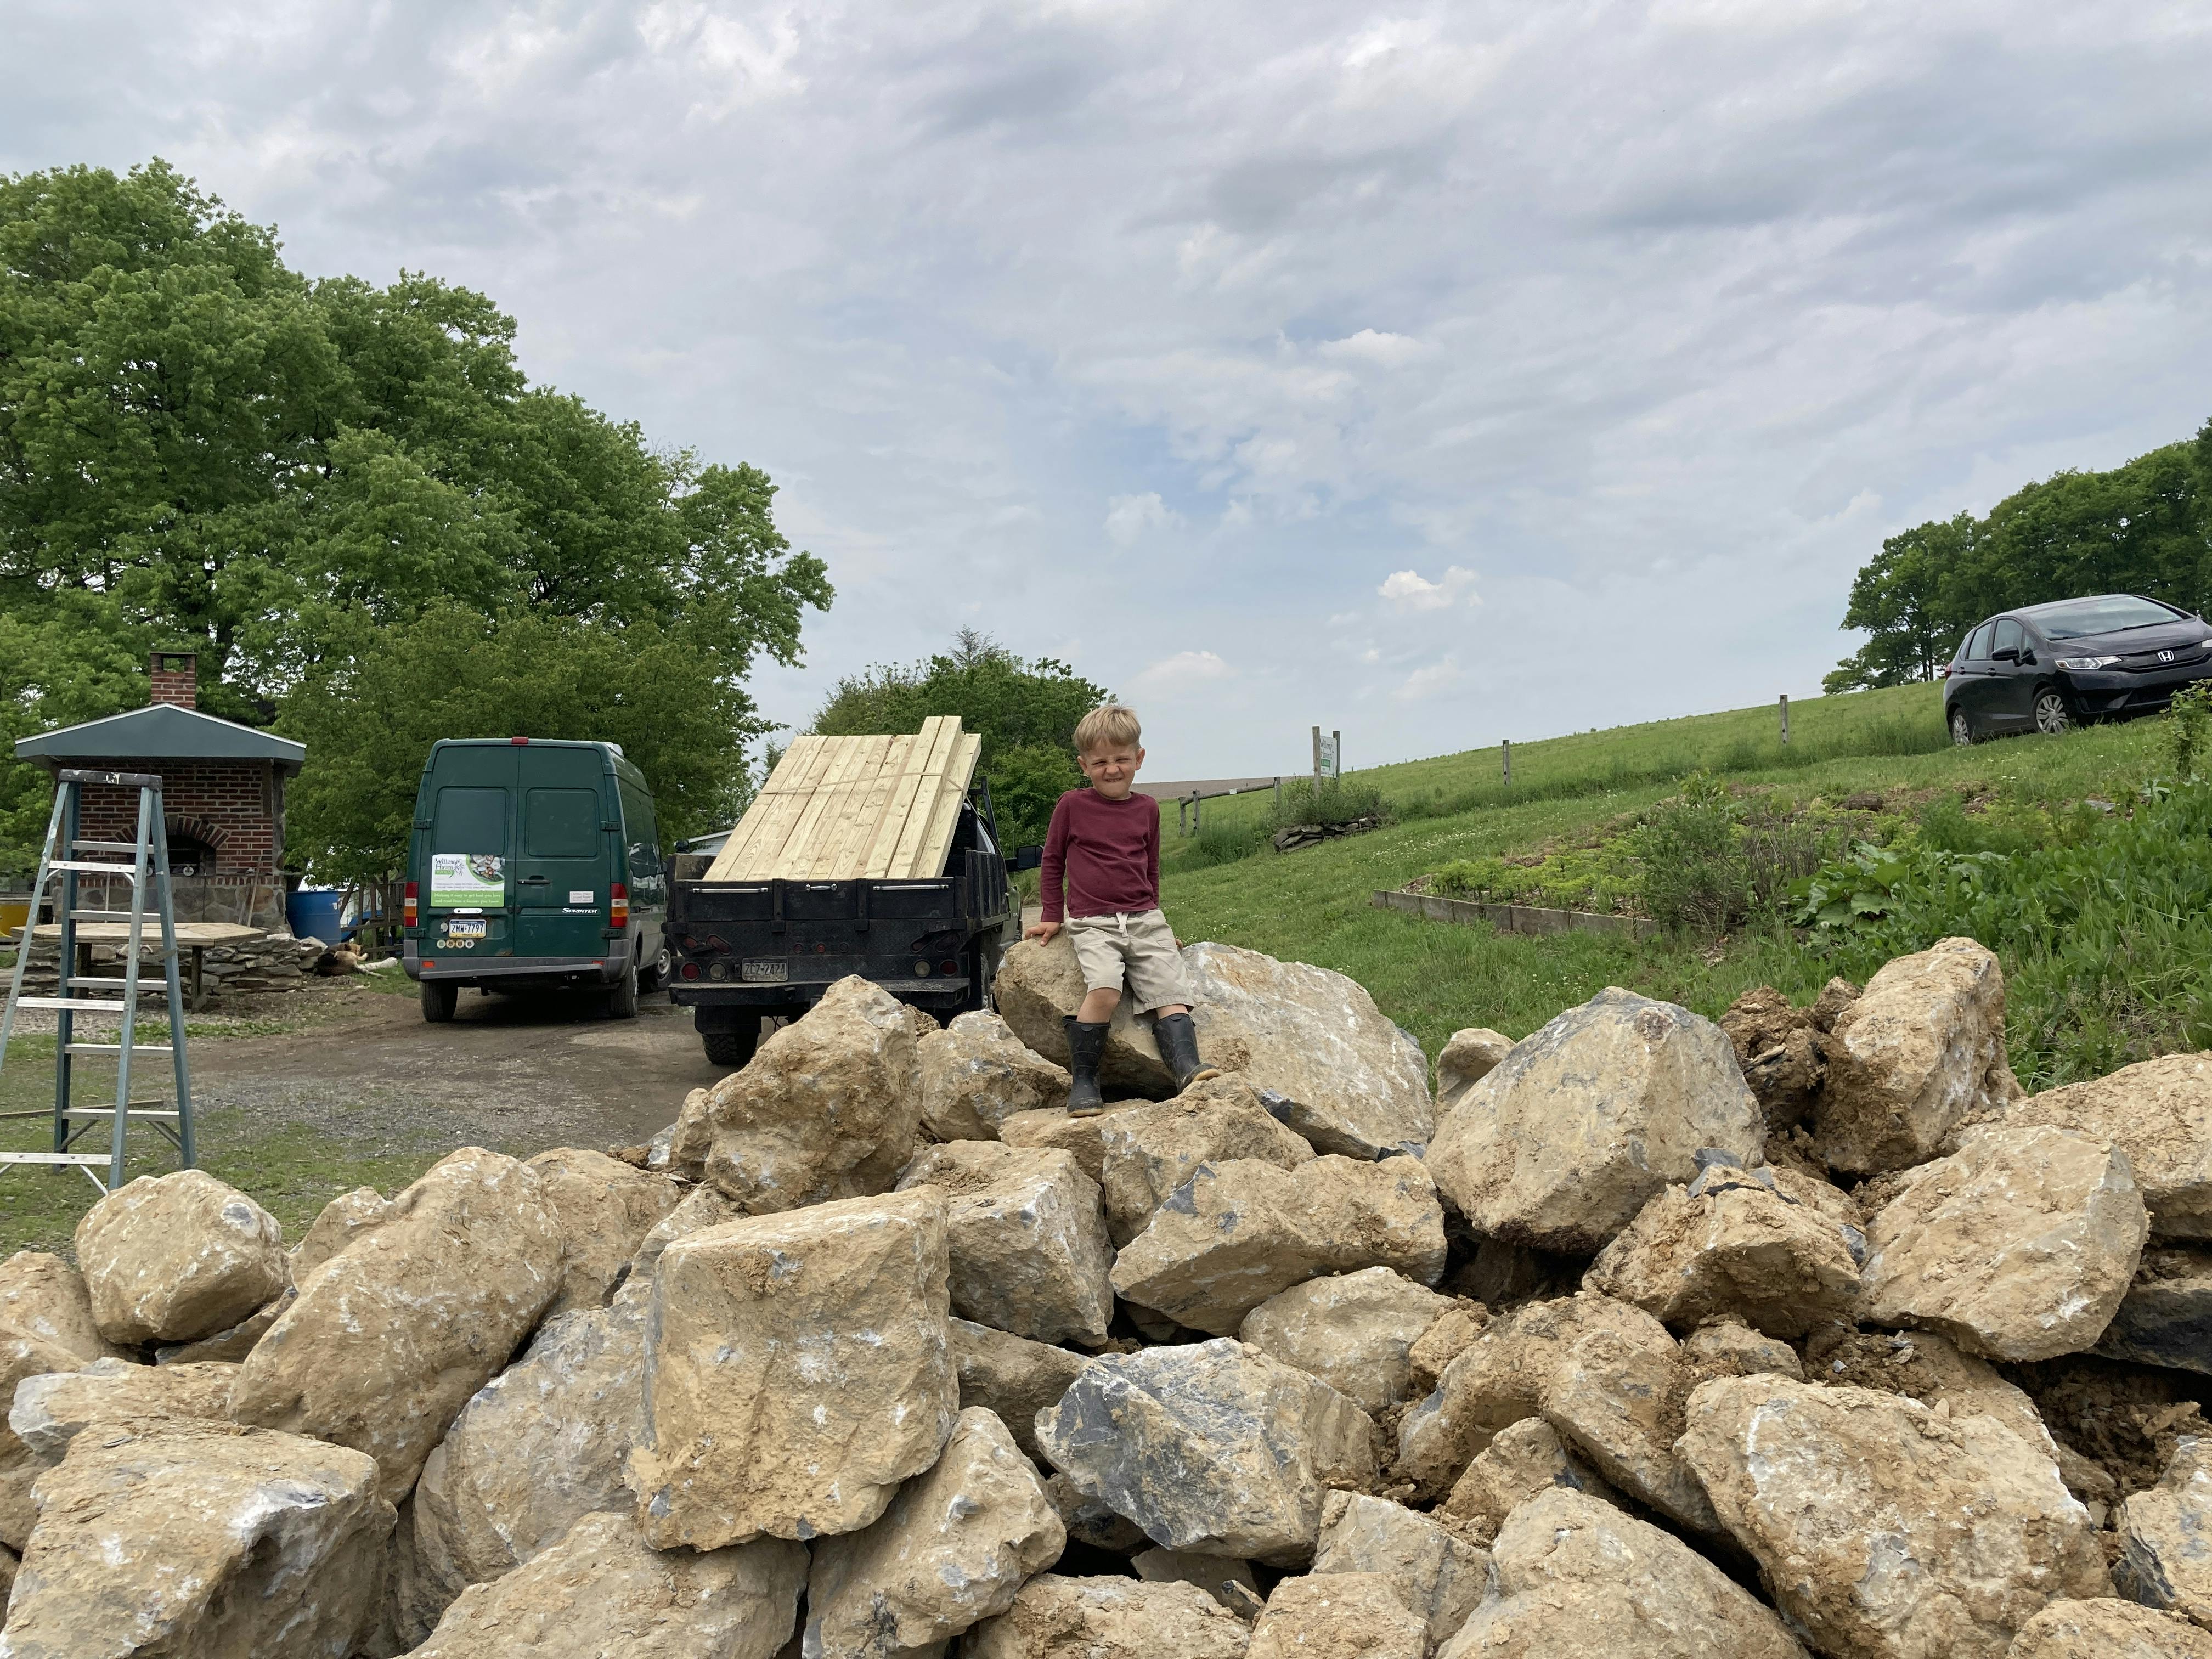 We moved this pile of rocks